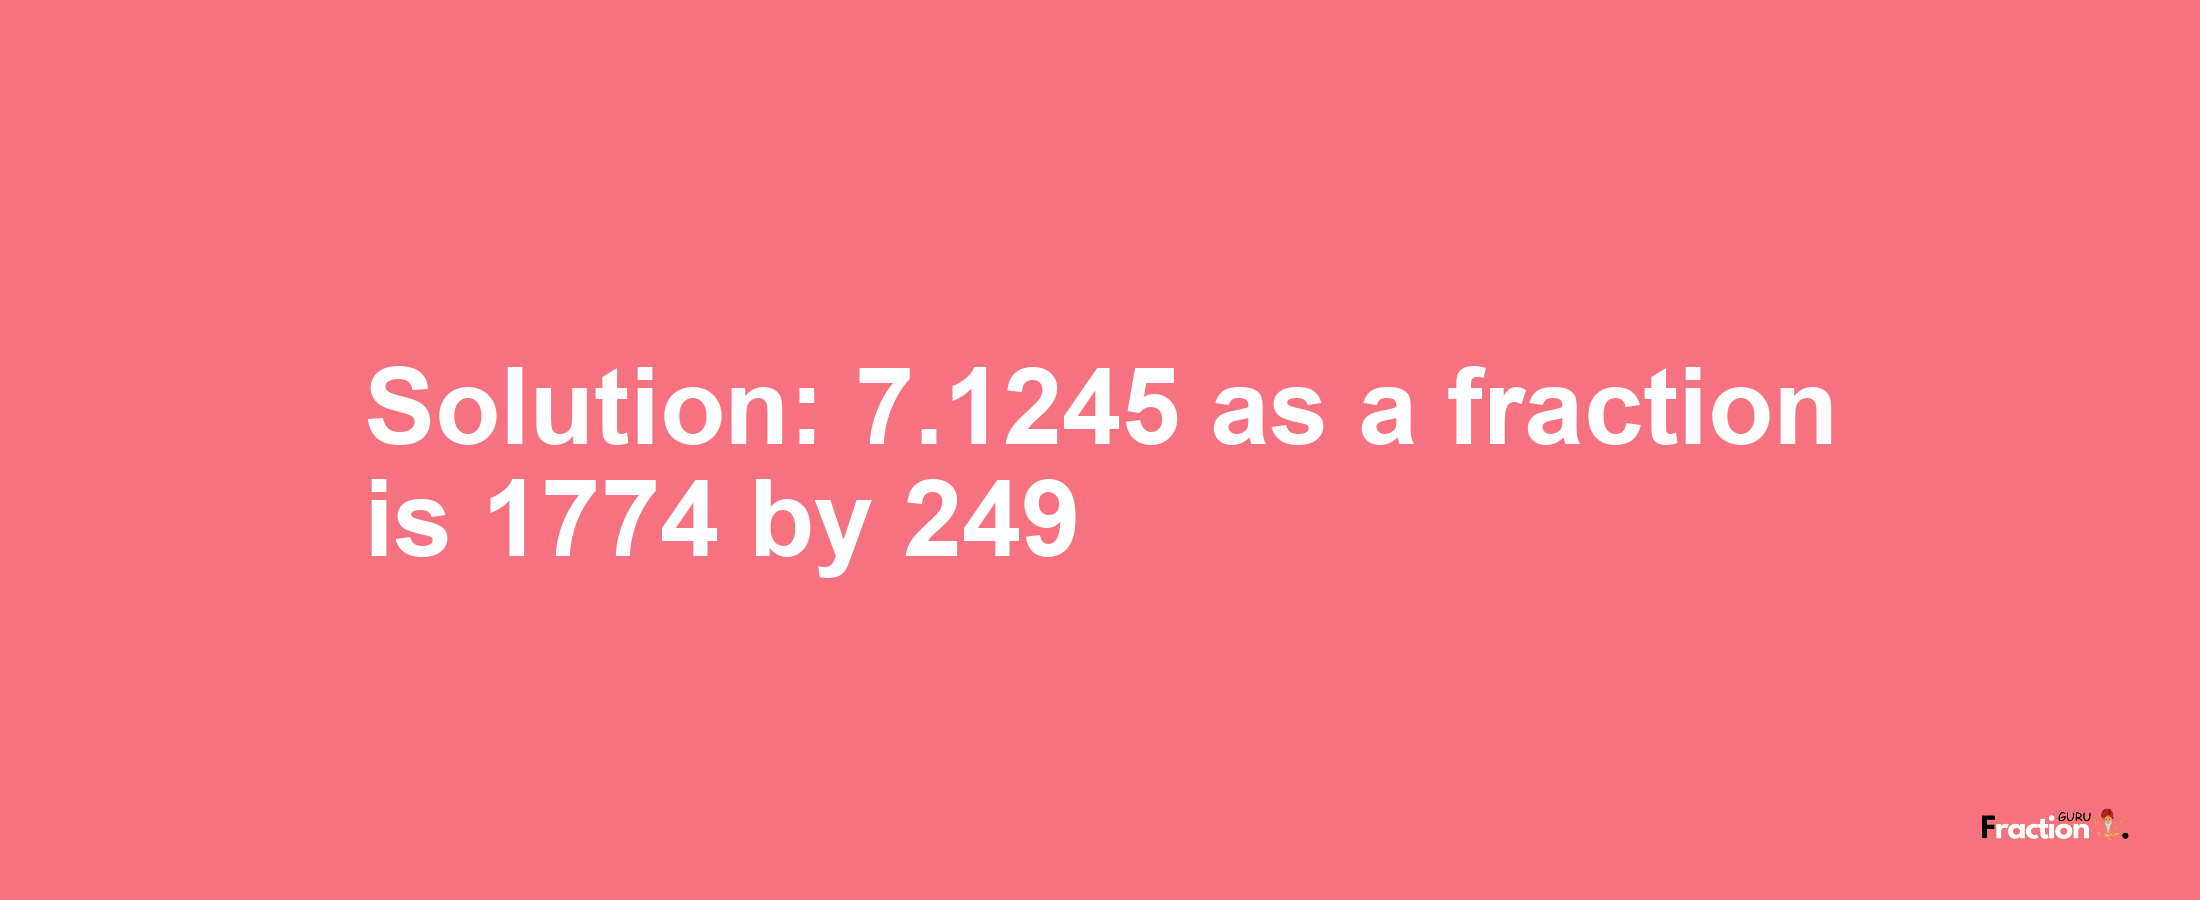 Solution:7.1245 as a fraction is 1774/249